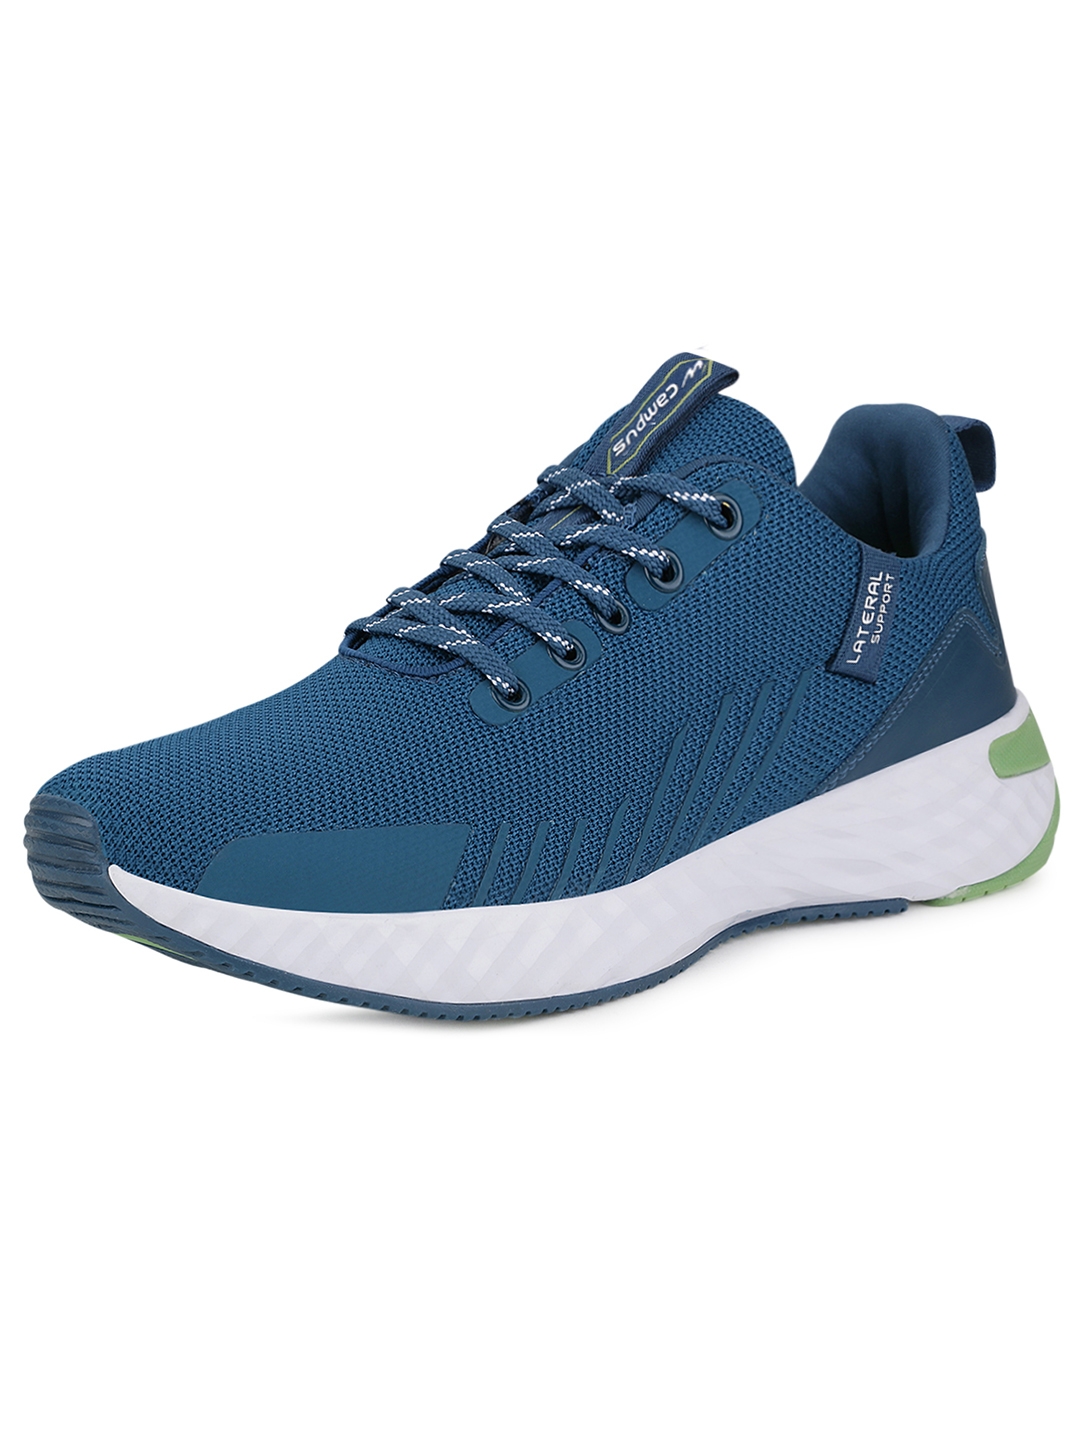 Campus Shoes | Blue Simba Pro Running Shoes